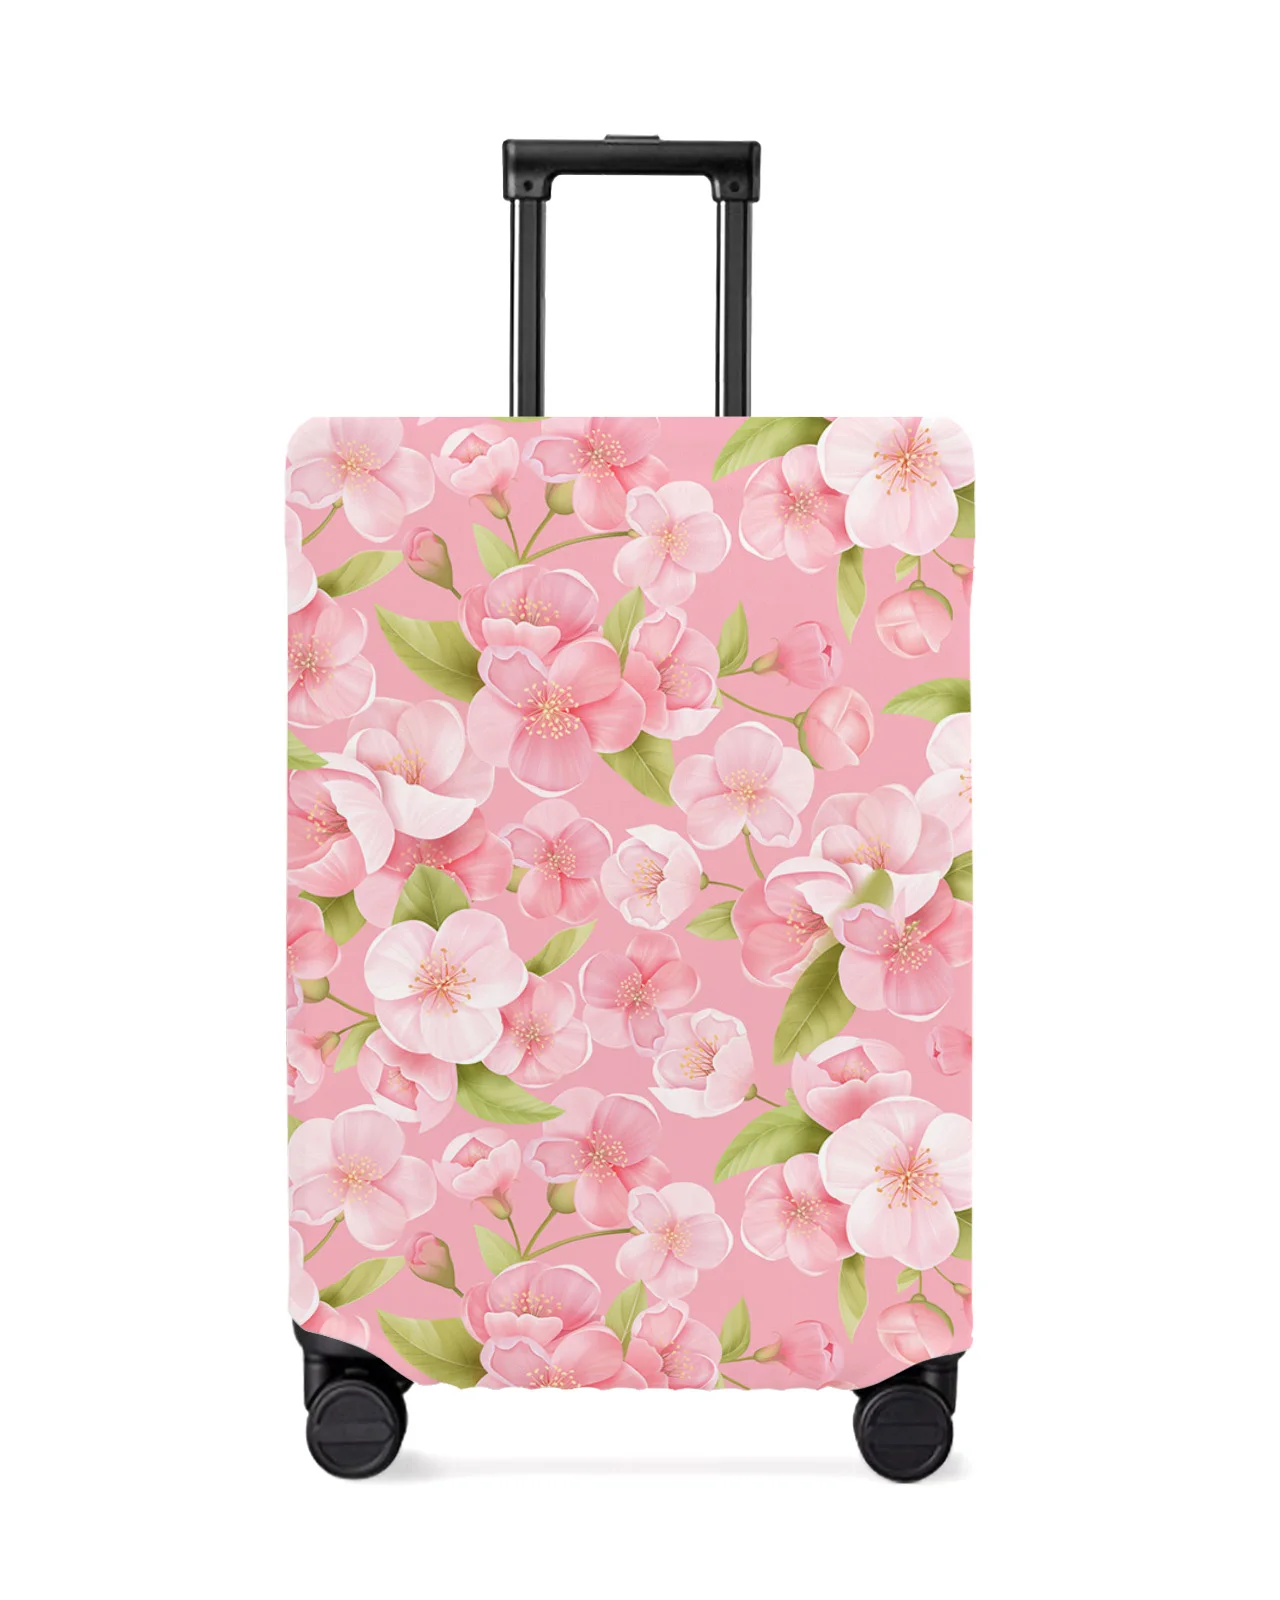 pink-flower-luggage-cover-stretch-suitcase-protector-baggage-dust-case-cover-for-18-32-inch-suitcase-case-travel-organizer